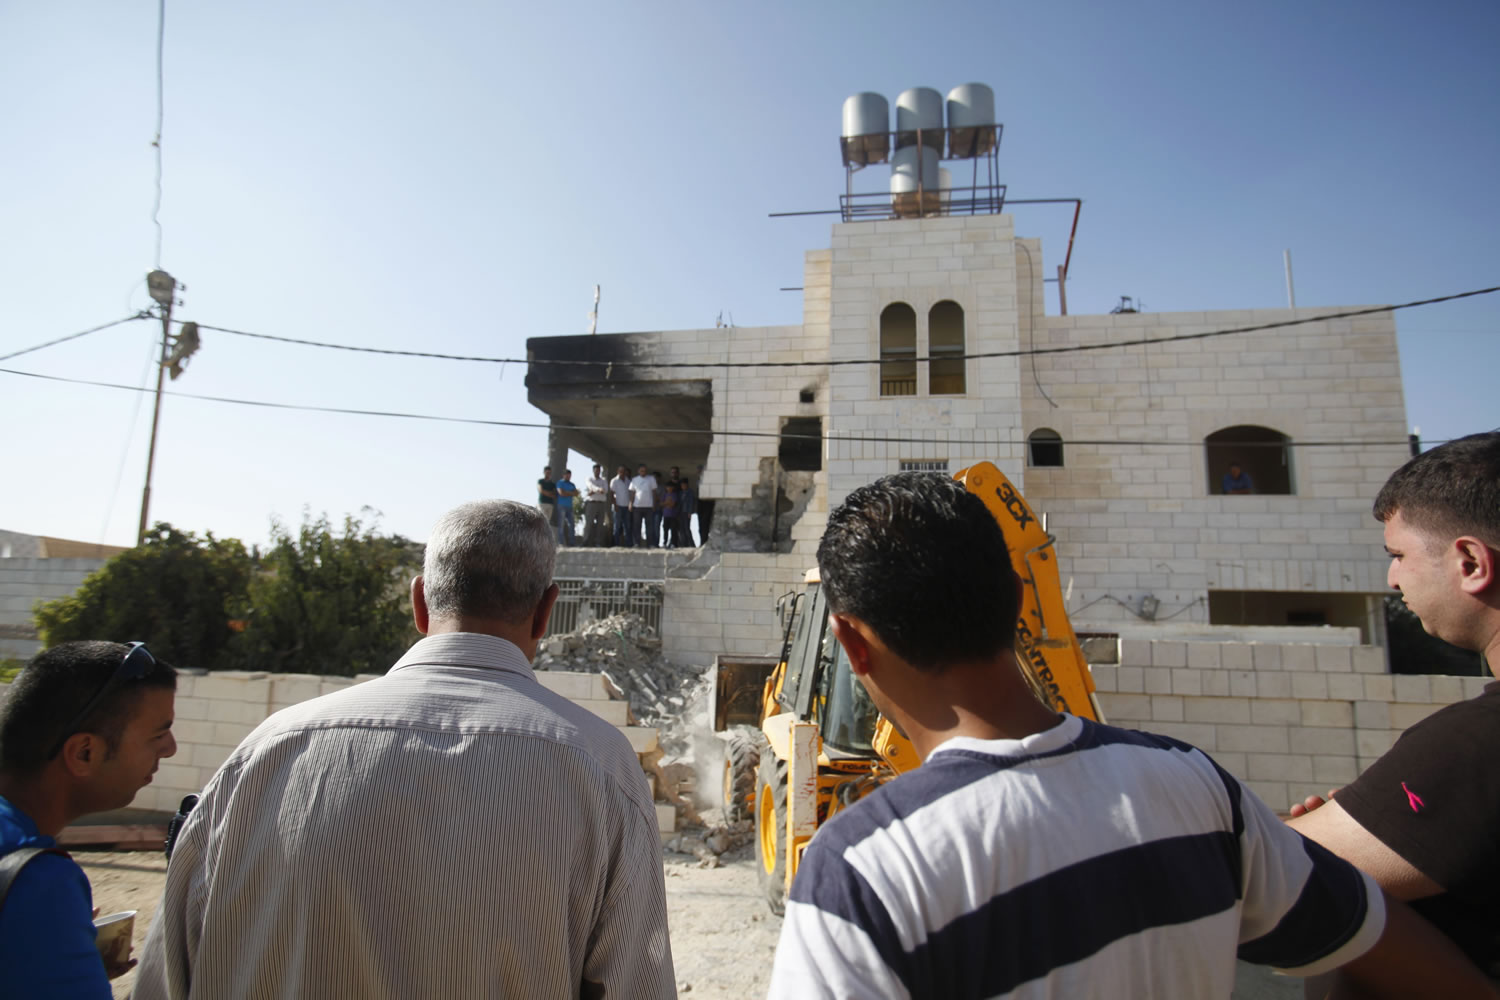 Palestinians look at the home of Amer Abu Aisheh, one of three Palestinians identified by Israel as suspects in the killing of three Israeli teenagers, after it was demolished by the Israeli army in the West Bank city of Hebron on Monday.